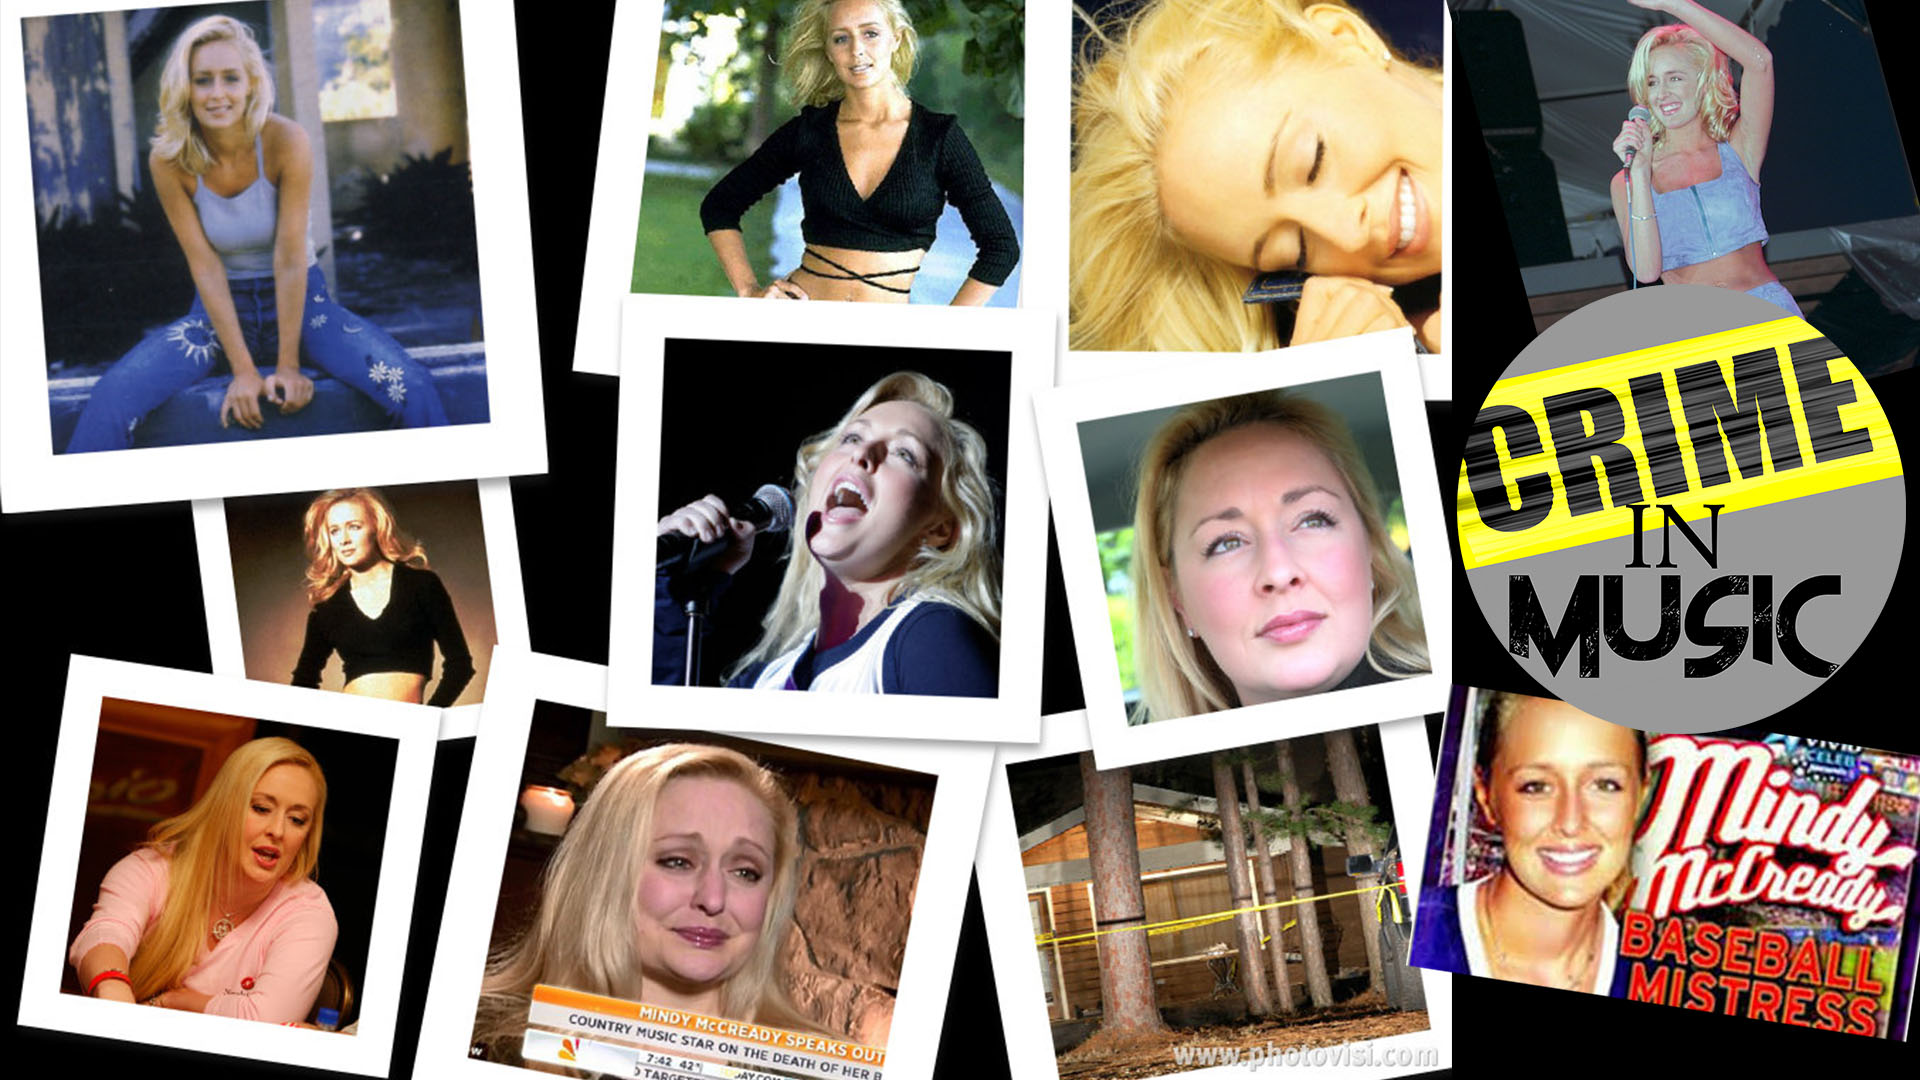 photo collage of Mindy McCready, Musician, country music